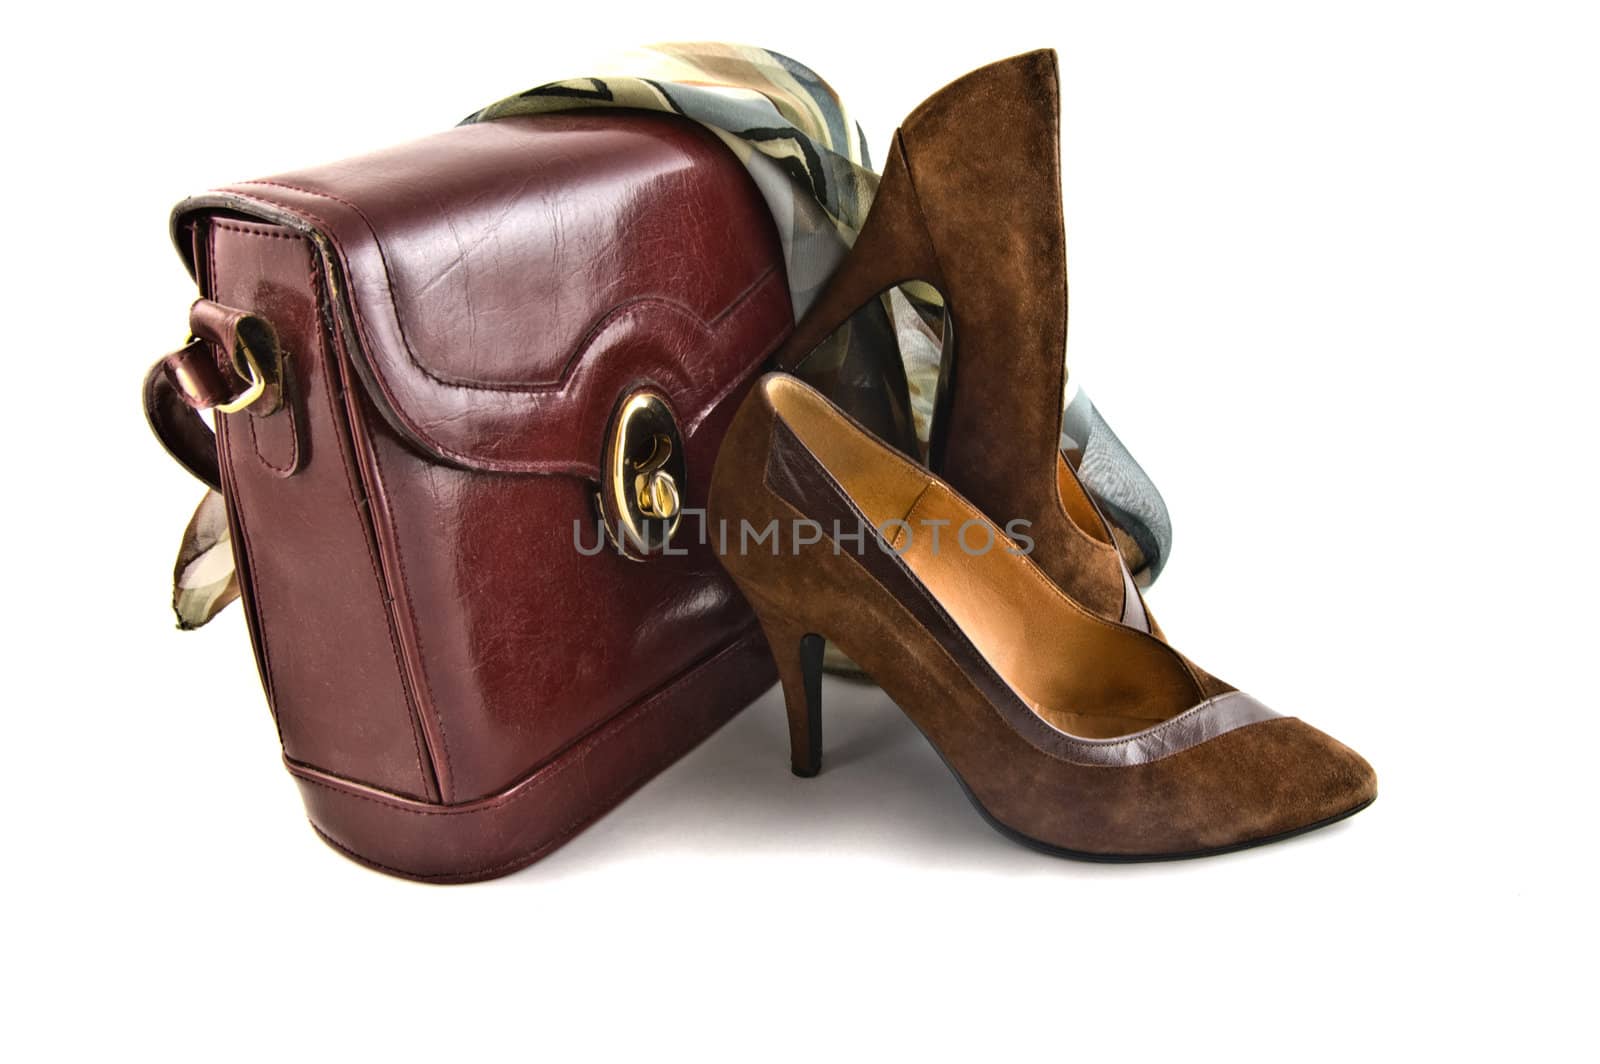 old brown shoes, skarf and bag on white background isolated